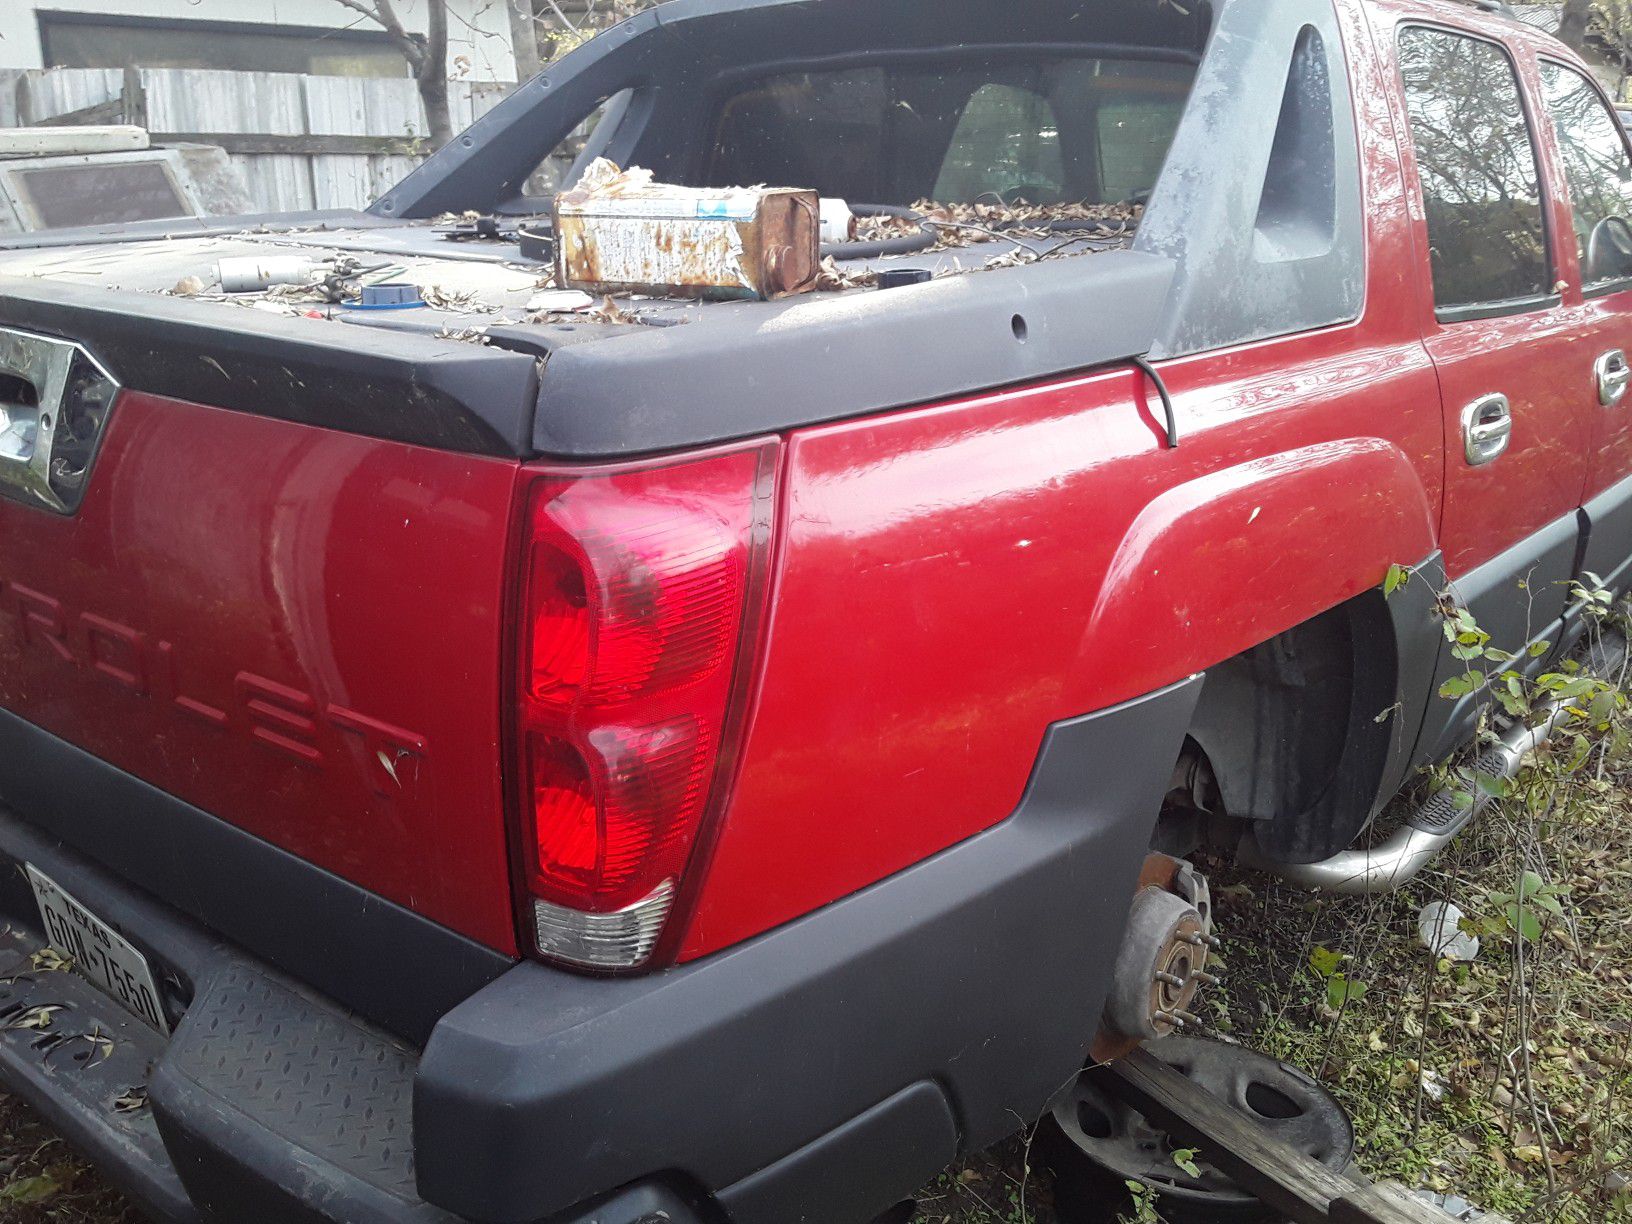 2004 Avalanche parting out body parts. Dent free fenders,hood, doors and bumpers negotiable you pull parts you need discounted, priced to sell